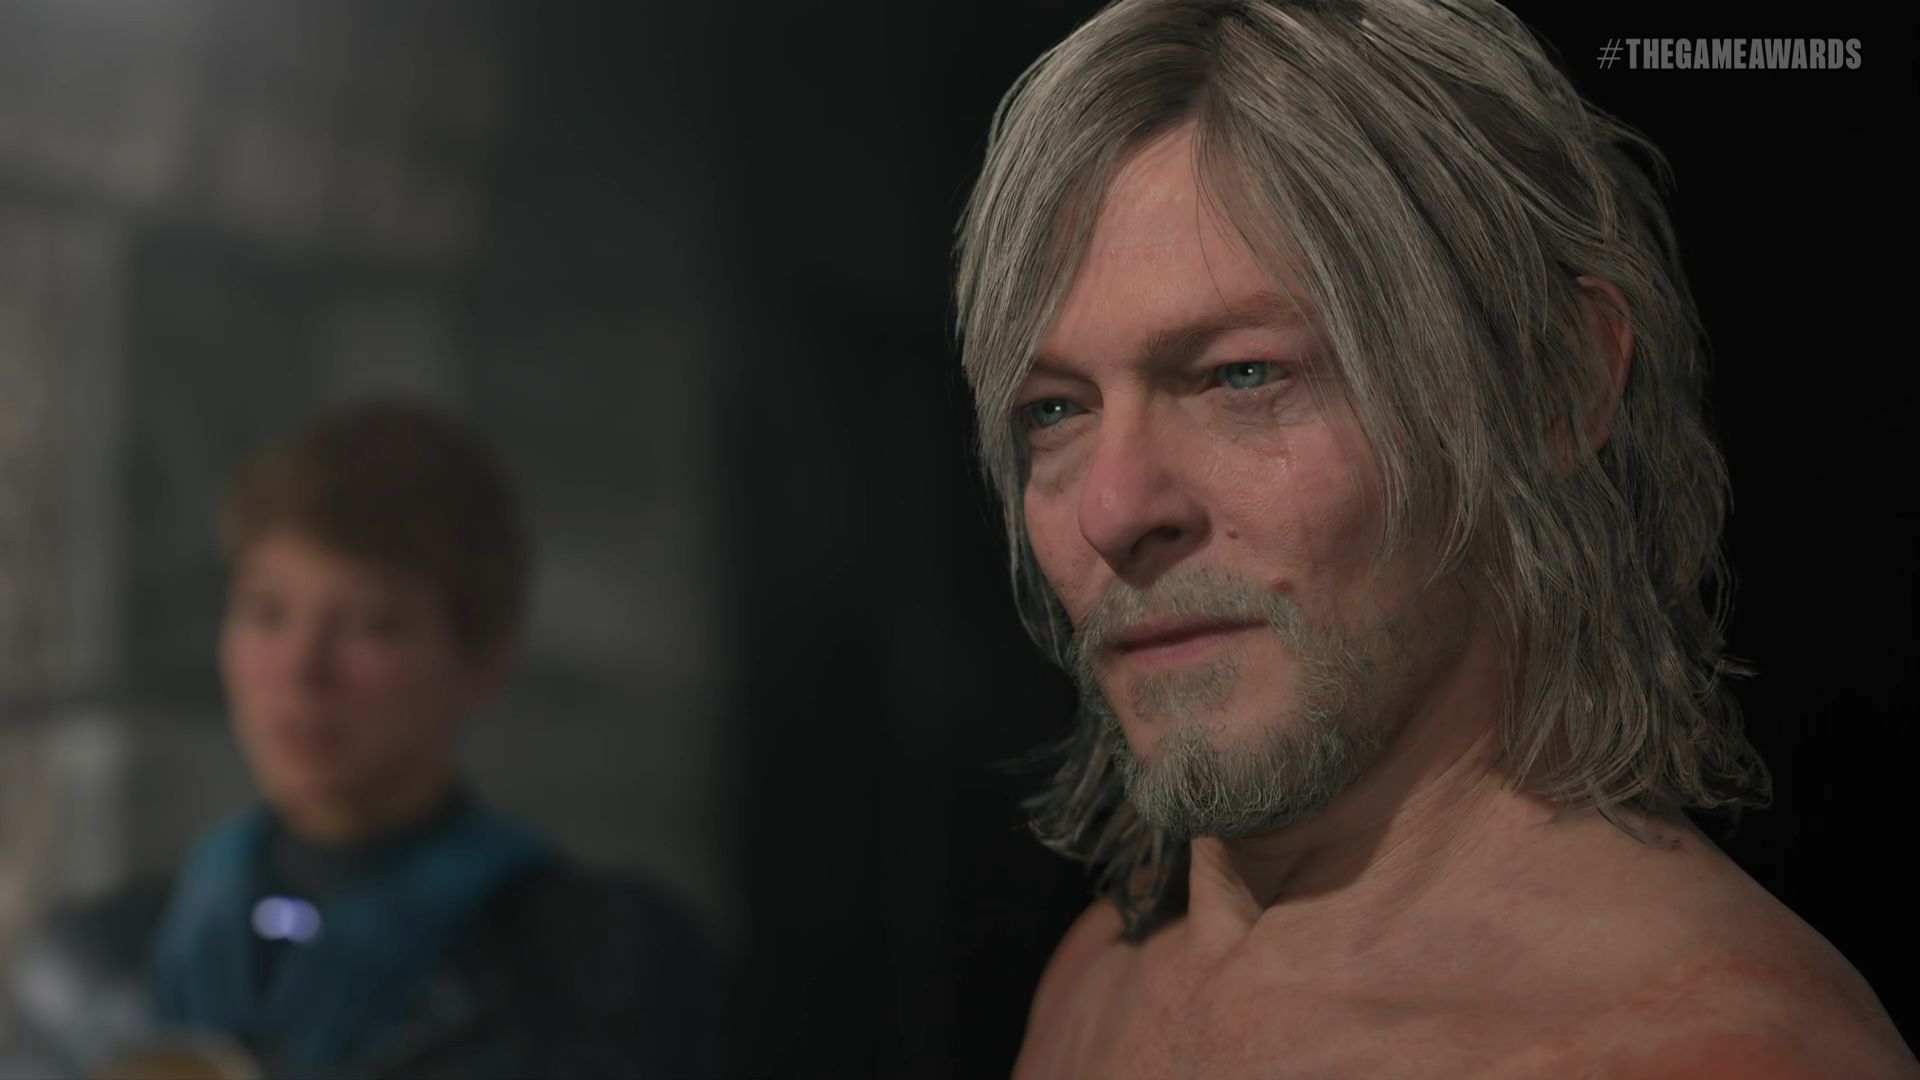 Death Stranding 2 Theories Explain the Masked Figure's Identity